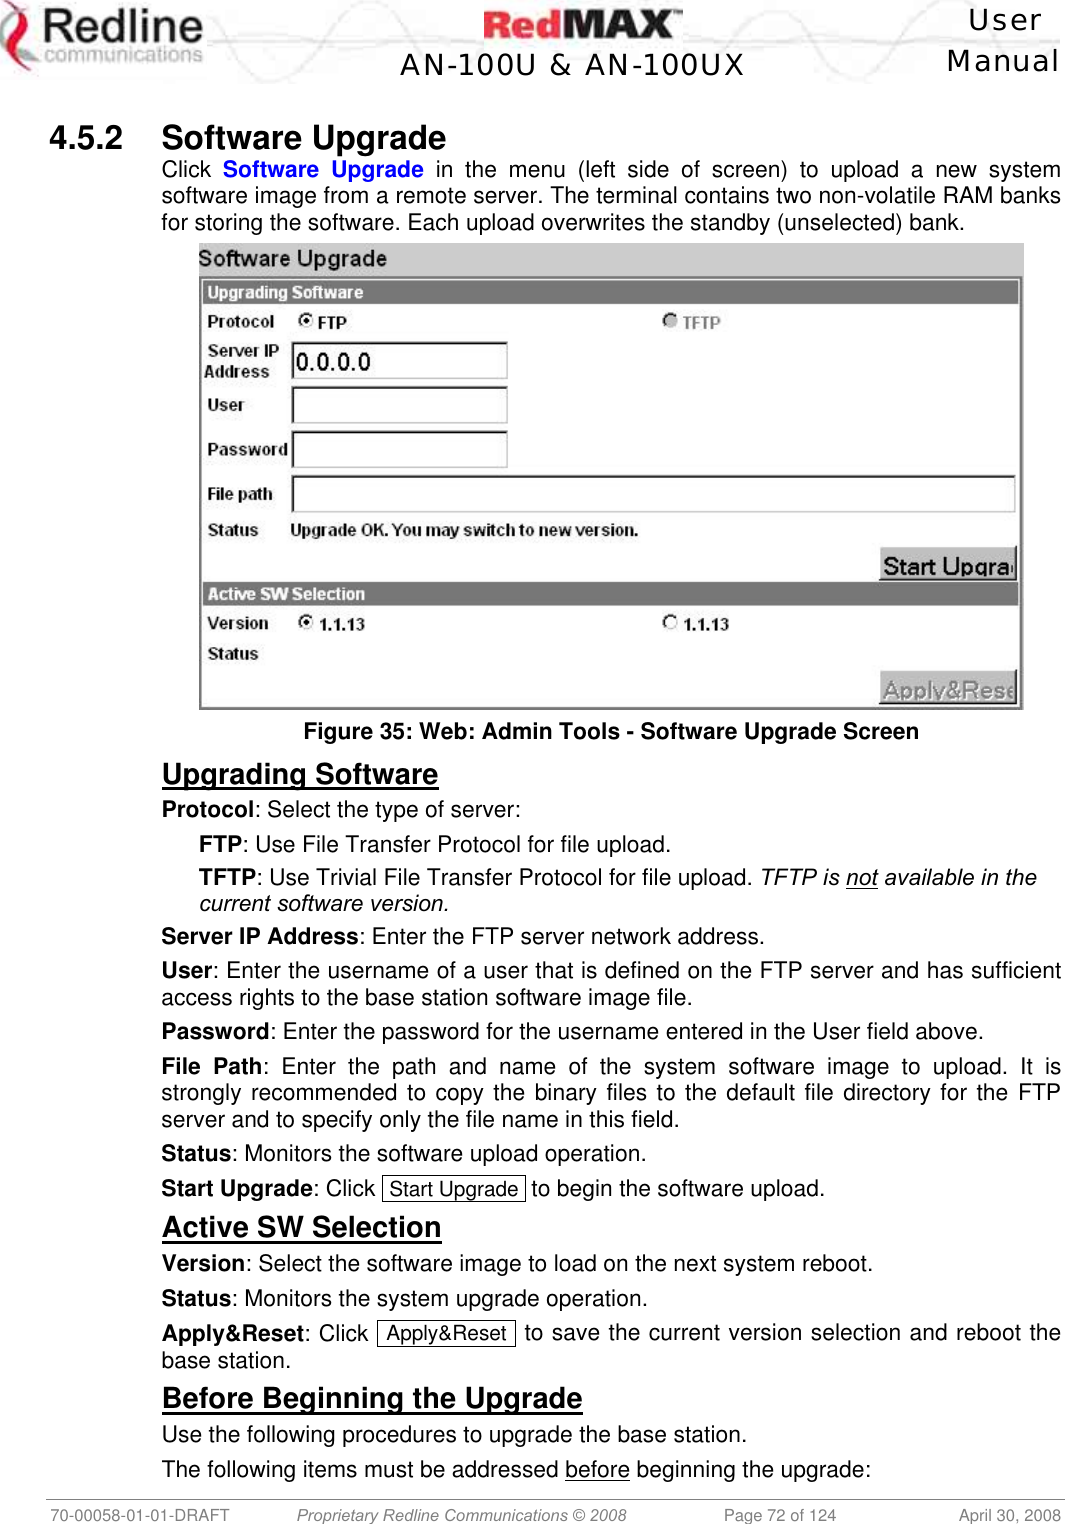    User  AN-100U &amp; AN-100UX Manual   70-00058-01-01-DRAFT  Proprietary Redline Communications © 2008   Page 72 of 124  April 30, 2008  4.5.2 Software Upgrade Click  Software Upgrade in the menu (left side of screen) to upload a new system software image from a remote server. The terminal contains two non-volatile RAM banks for storing the software. Each upload overwrites the standby (unselected) bank.  Figure 35: Web: Admin Tools - Software Upgrade Screen Upgrading Software Protocol: Select the type of server: FTP: Use File Transfer Protocol for file upload. TFTP: Use Trivial File Transfer Protocol for file upload. TFTP is not available in the current software version. Server IP Address: Enter the FTP server network address. User: Enter the username of a user that is defined on the FTP server and has sufficient access rights to the base station software image file. Password: Enter the password for the username entered in the User field above. File Path: Enter the path and name of the system software image to upload. It is strongly recommended to copy the binary files to the default file directory for the FTP server and to specify only the file name in this field. Status: Monitors the software upload operation. Start Upgrade: Click  Start Upgrade  to begin the software upload. Active SW Selection Version: Select the software image to load on the next system reboot. Status: Monitors the system upgrade operation. Apply&amp;Reset: Click  Apply&amp;Reset  to save the current version selection and reboot the base station. Before Beginning the Upgrade Use the following procedures to upgrade the base station. The following items must be addressed before beginning the upgrade: 